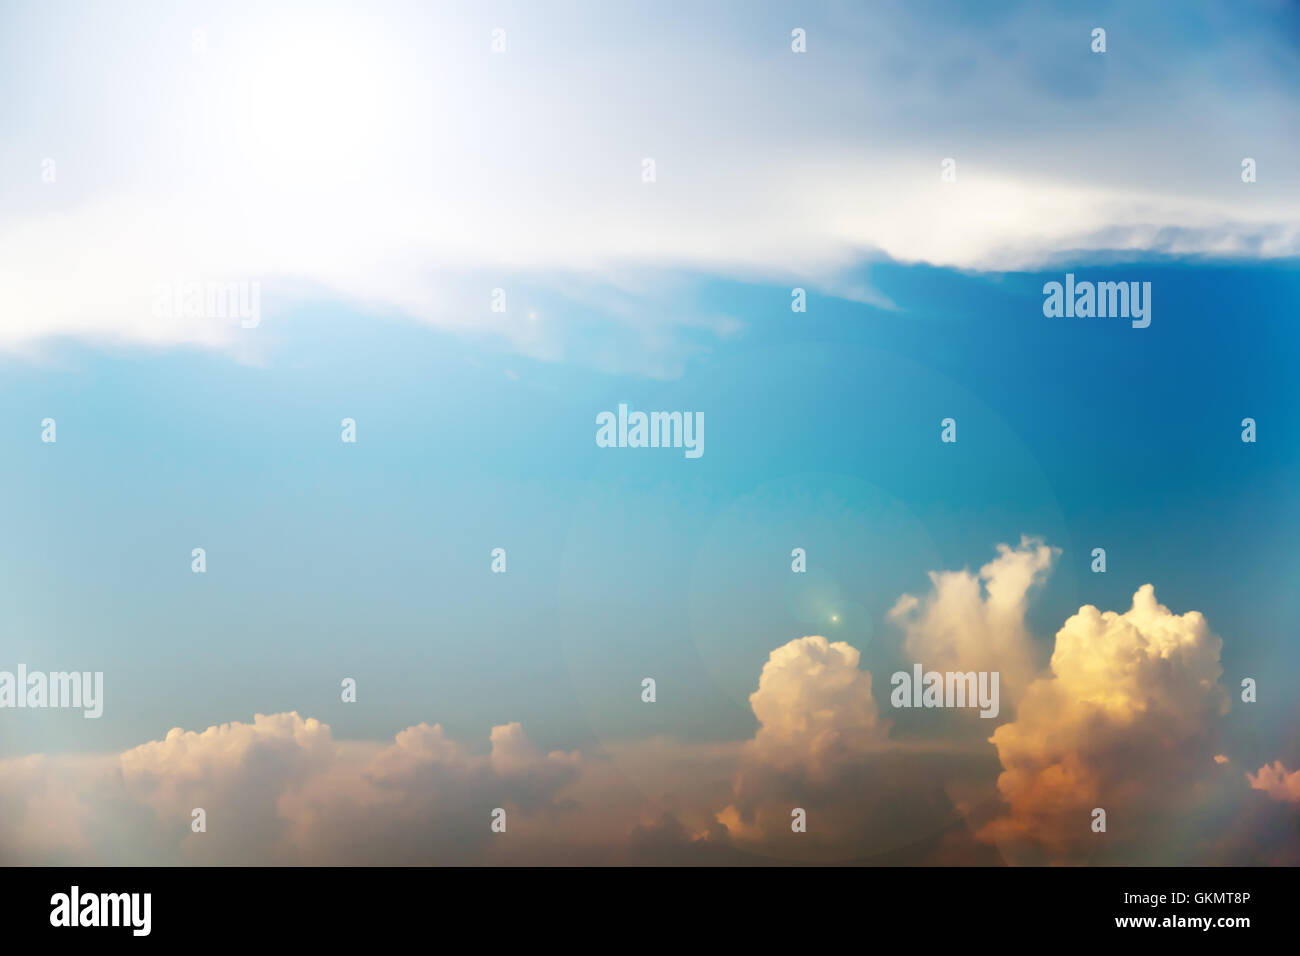 Sky sunset background picture Stock Photo